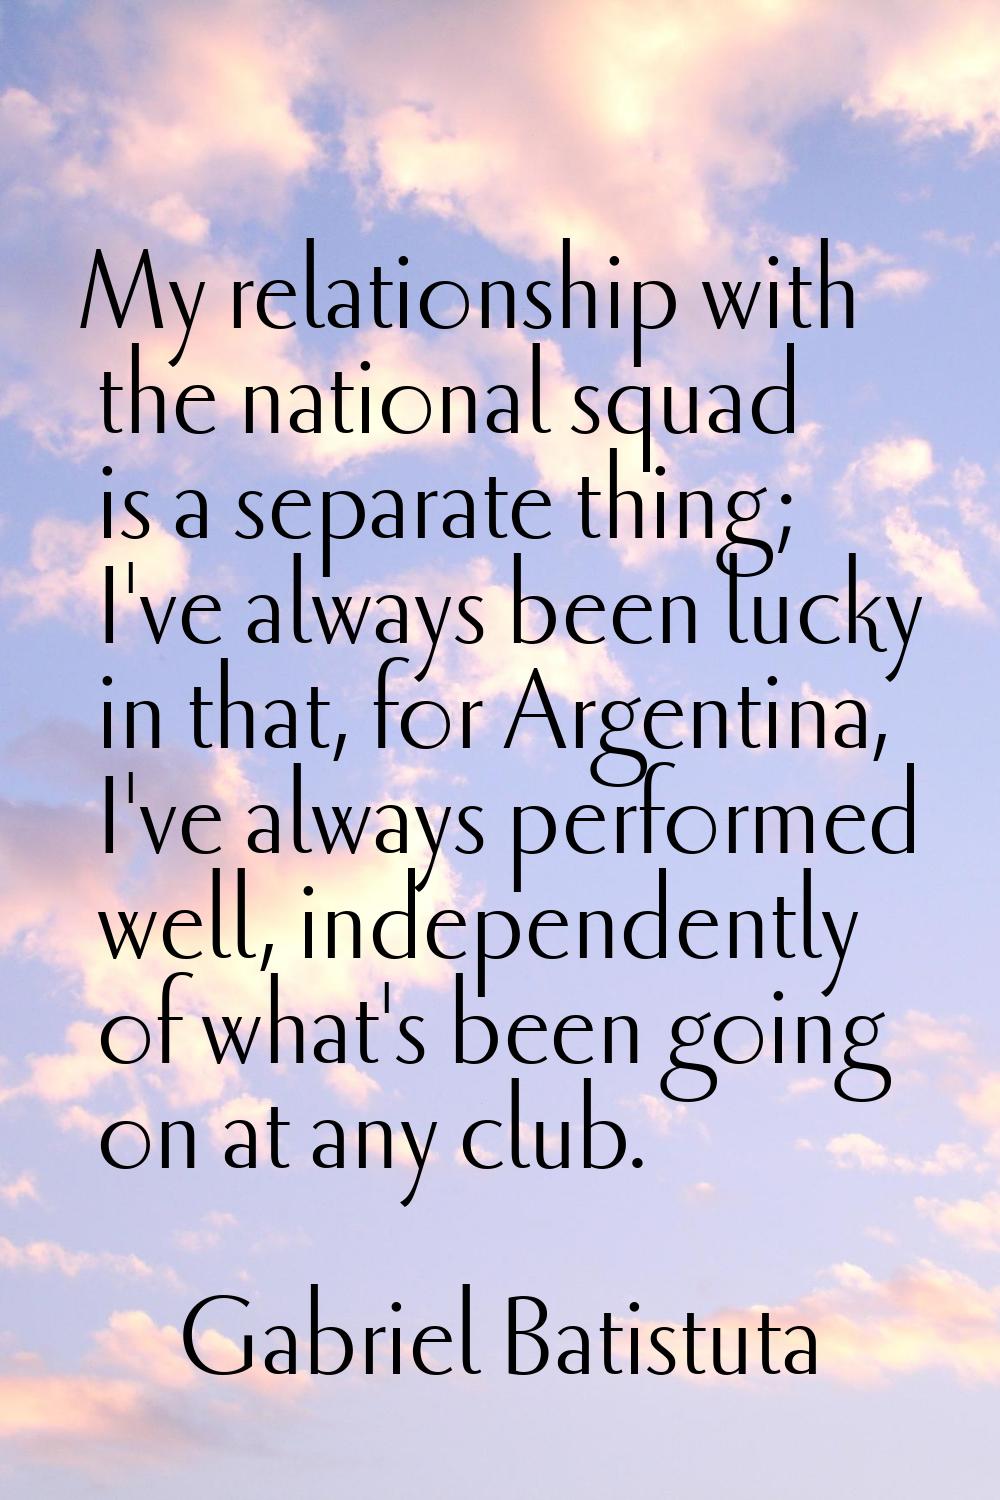 My relationship with the national squad is a separate thing; I've always been lucky in that, for Ar